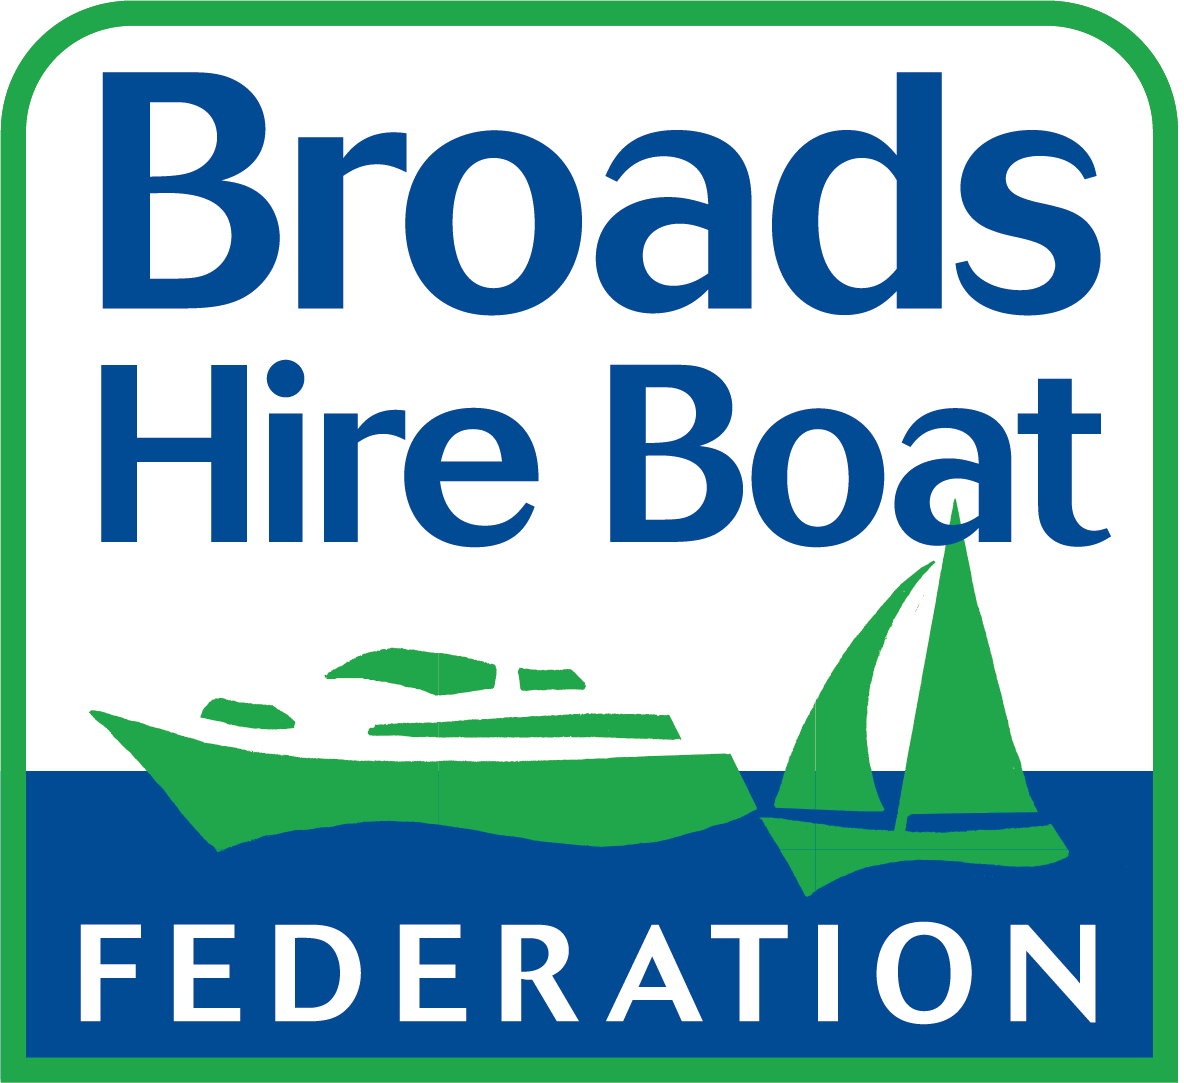 Broads Hire Boat Federation.png